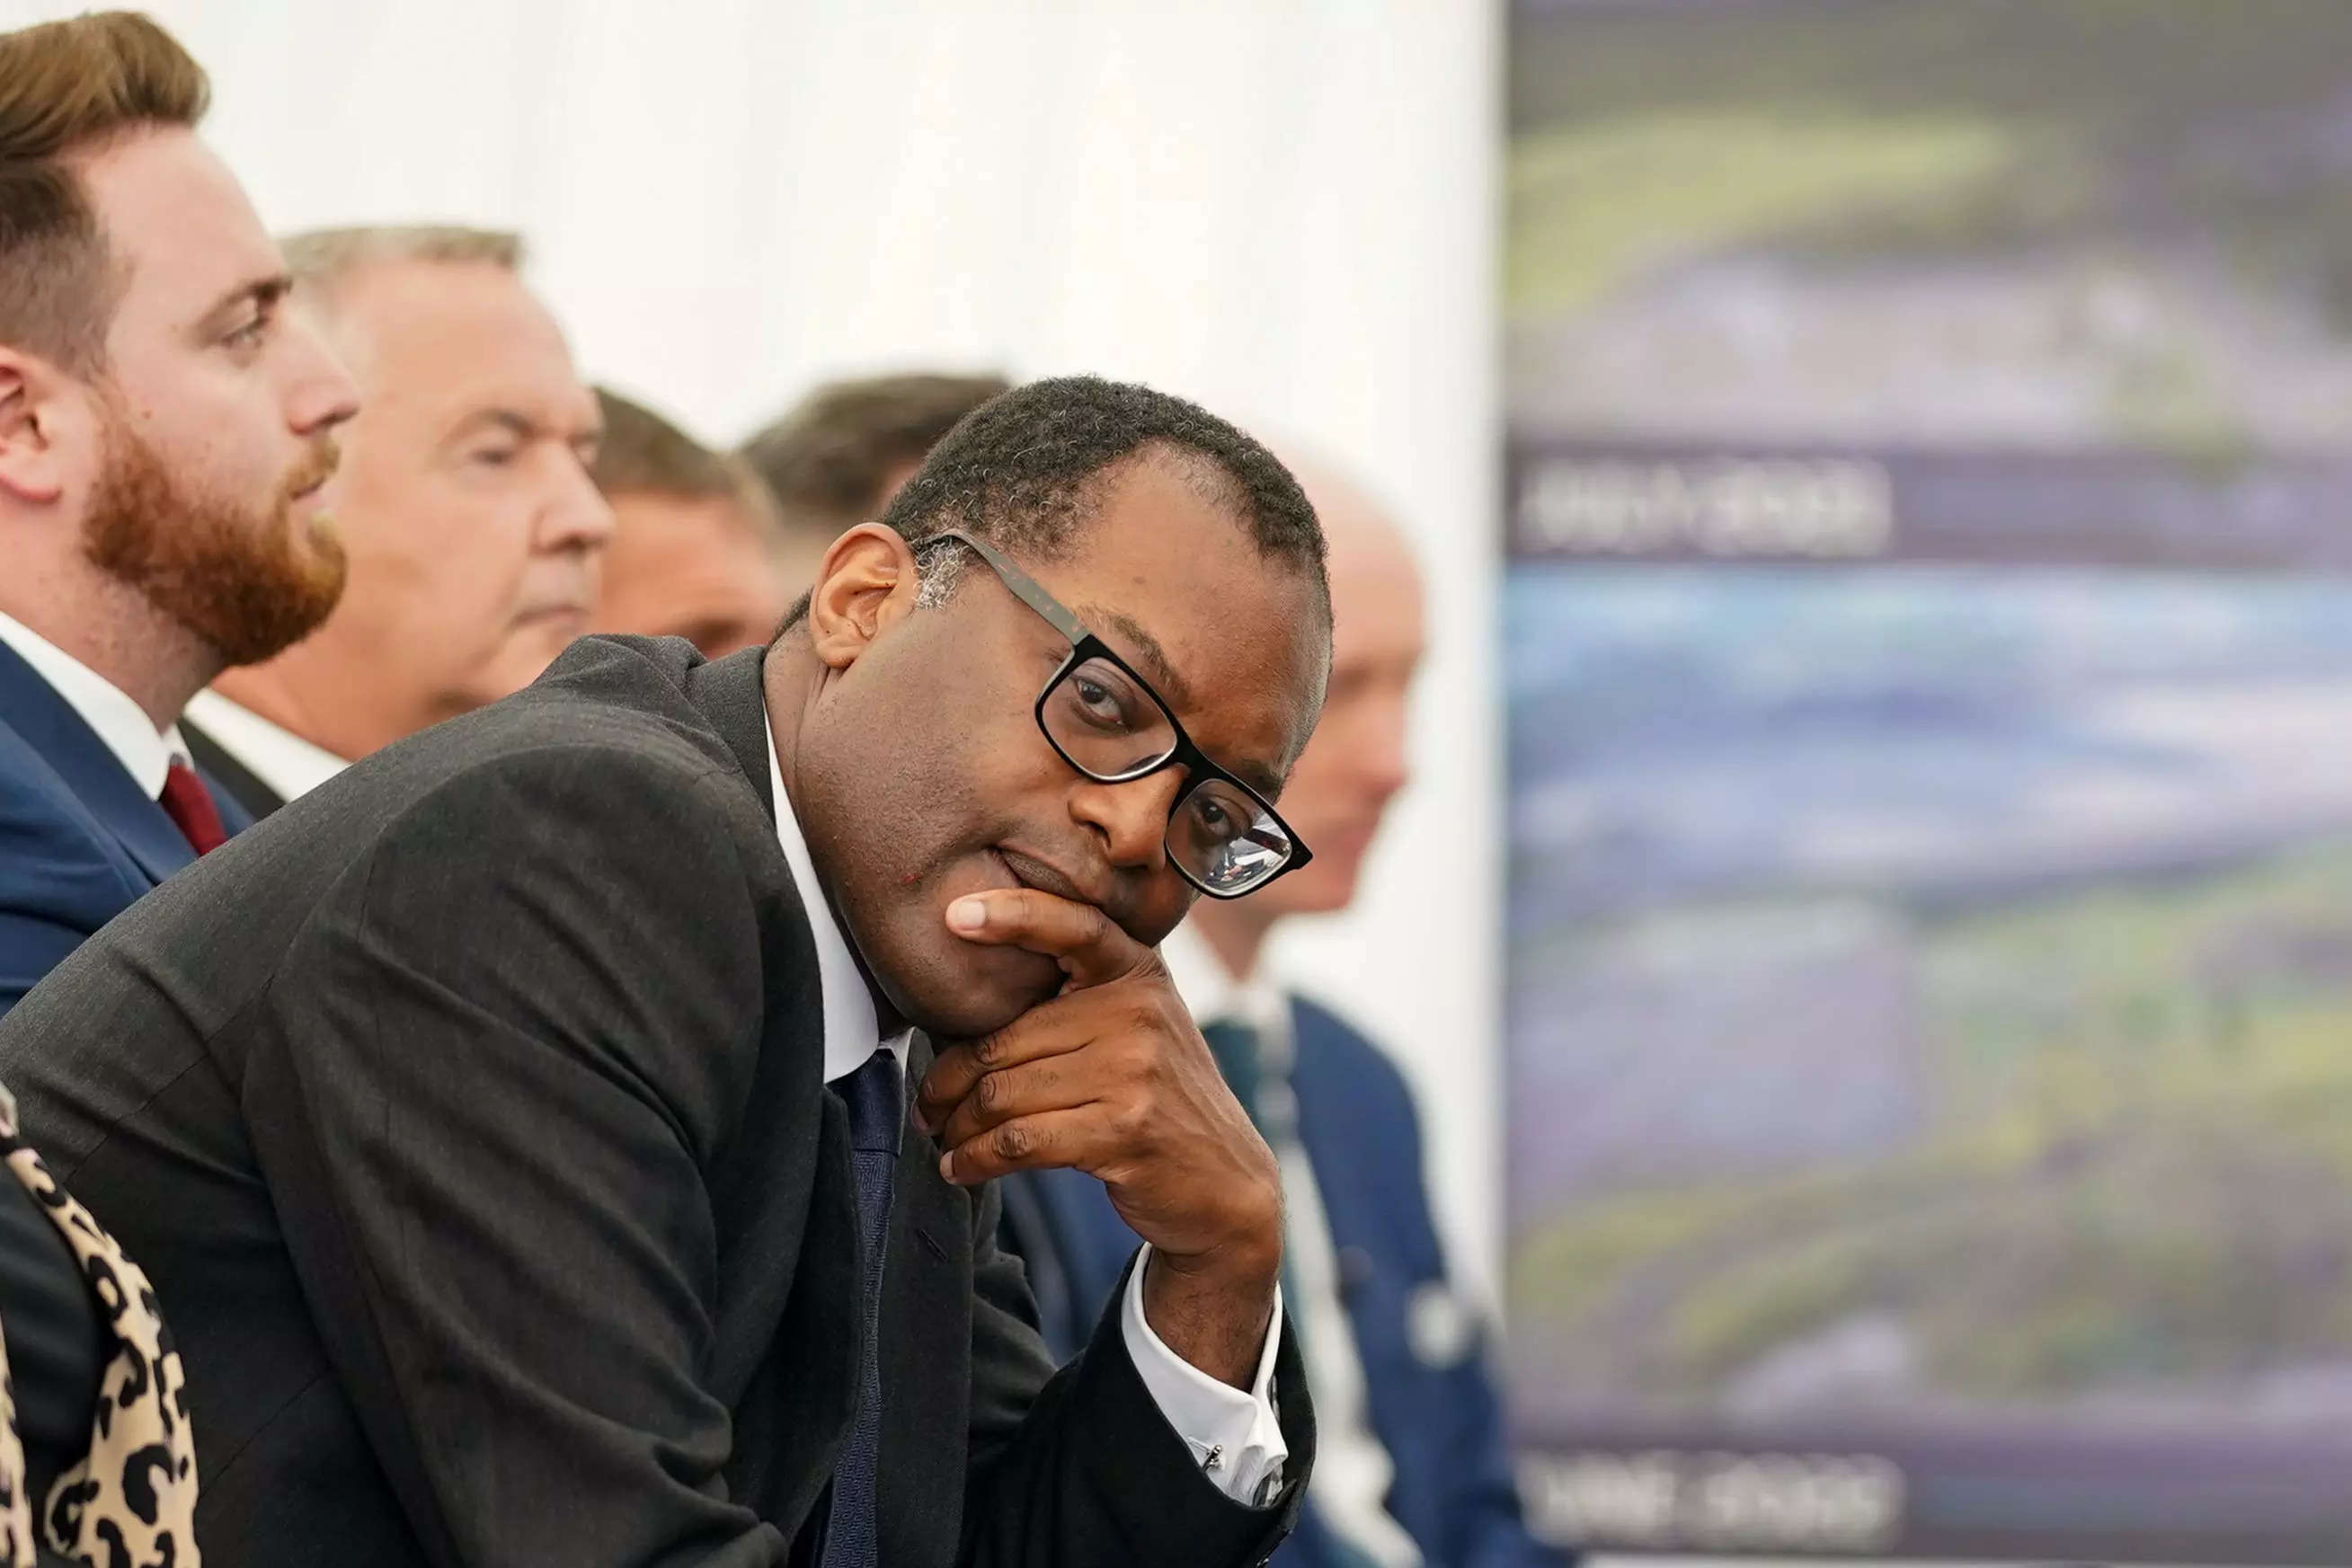 British Chancellor of the Exchequer Kwasi Kwarteng has been sacked as the country scales back tax cuts, reports say